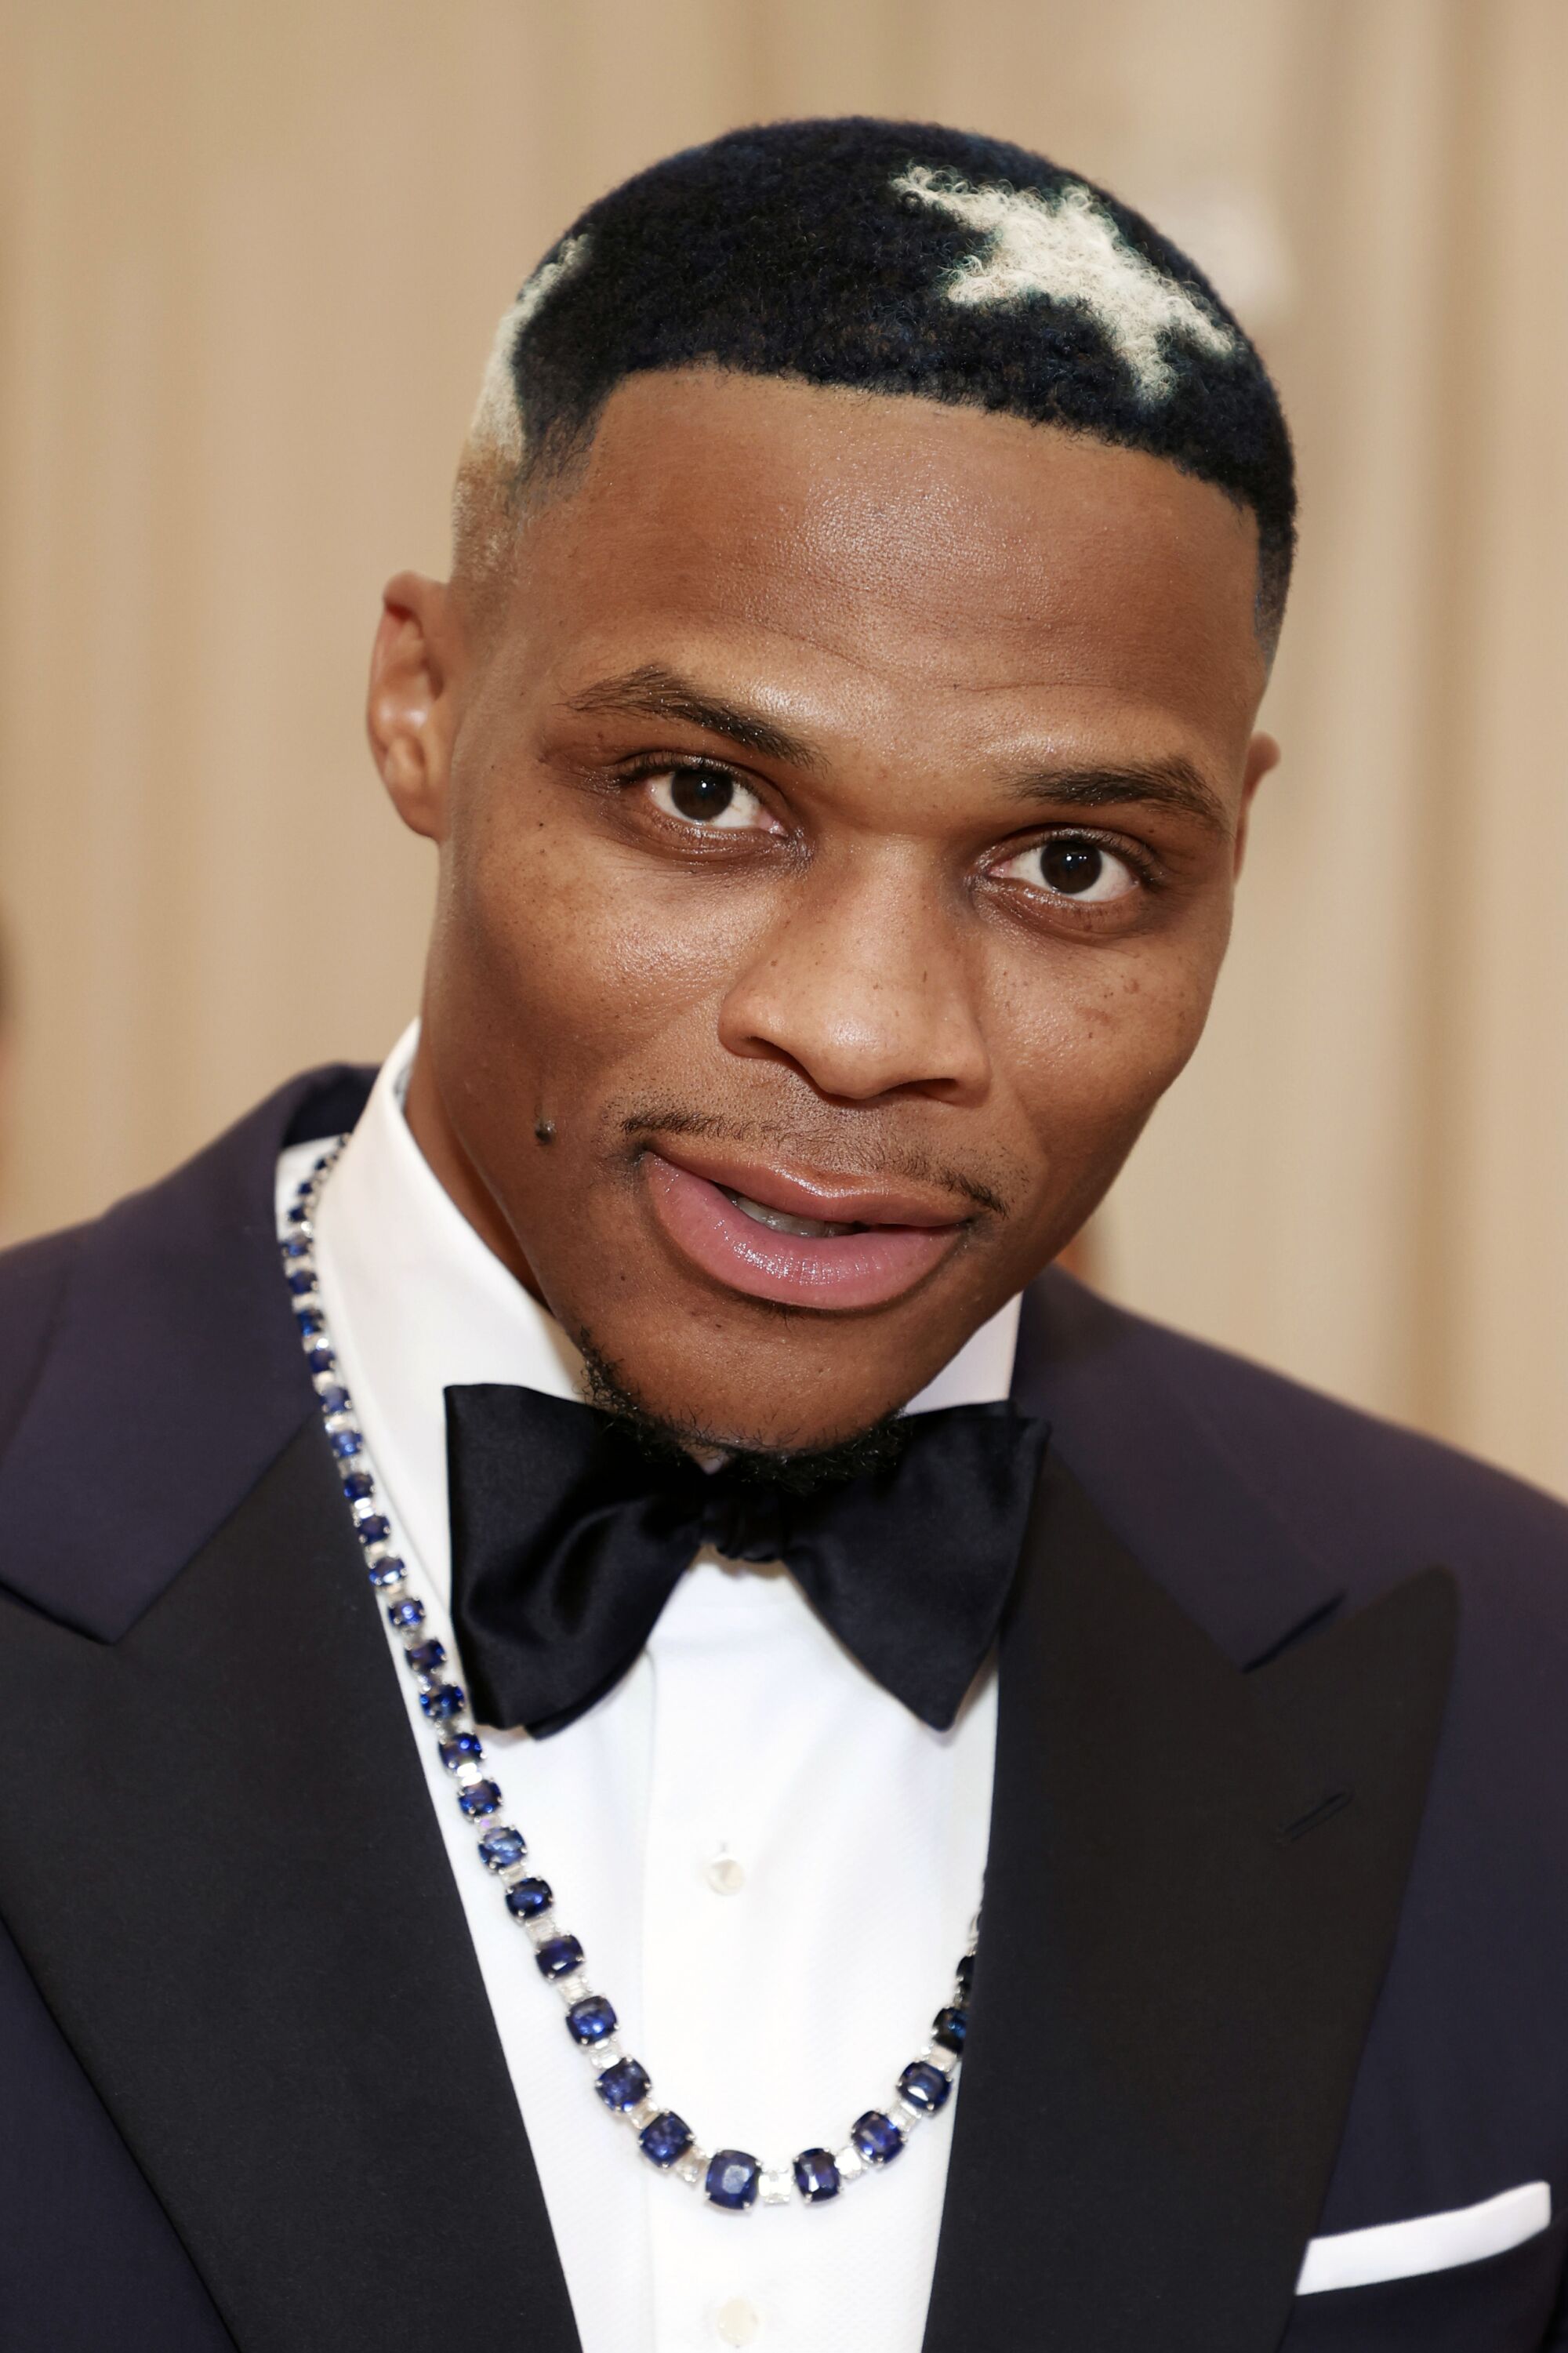 A man in a tuxedo with a star dyed into his hair